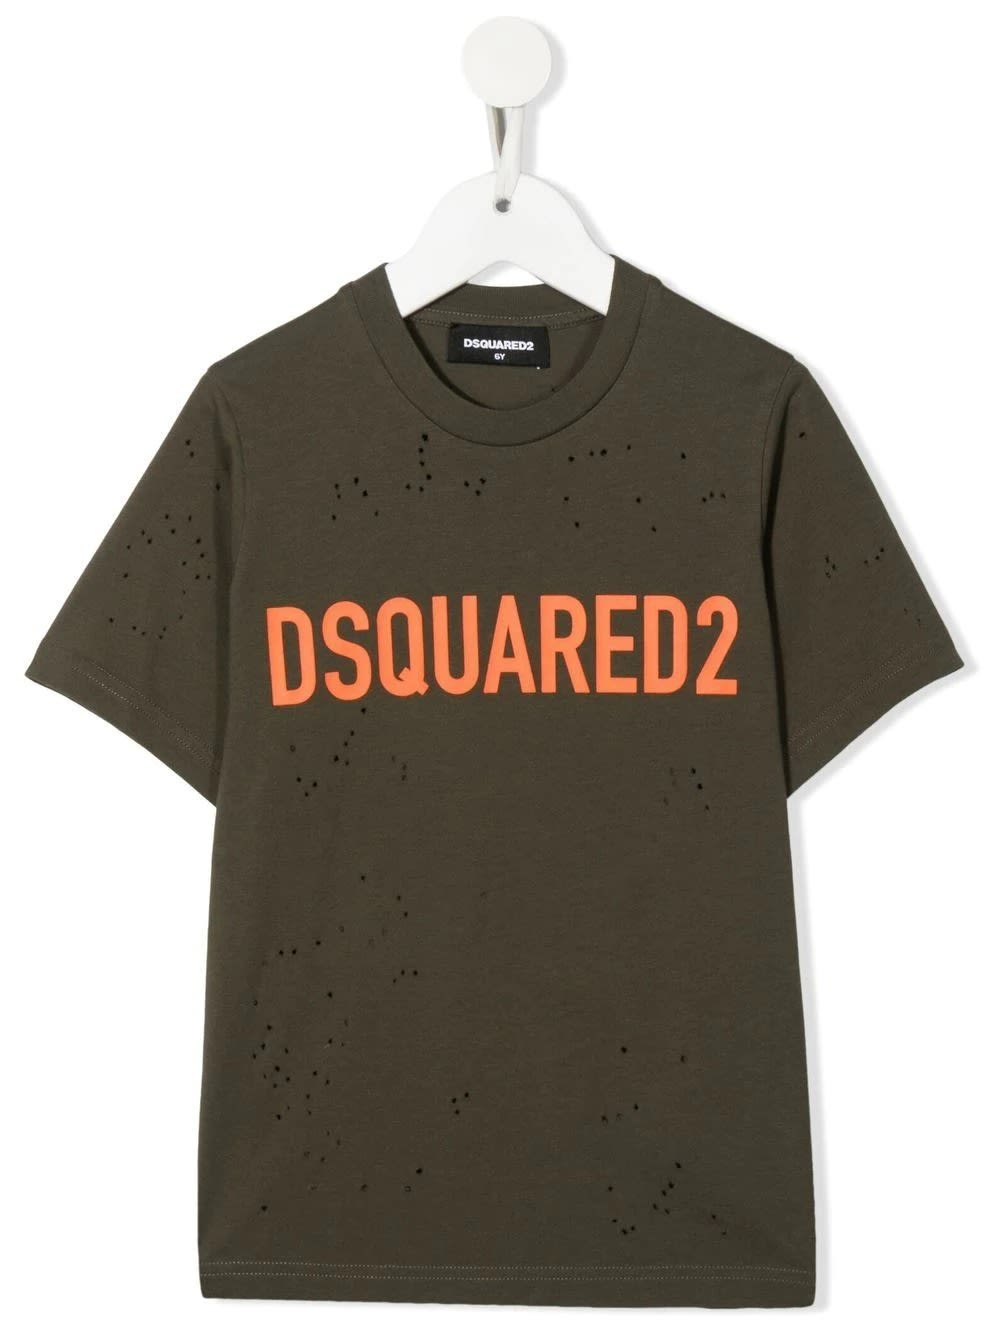 Dsquared2 Kids Military Green T-shirt With Ruined Effect And Contrast Logo